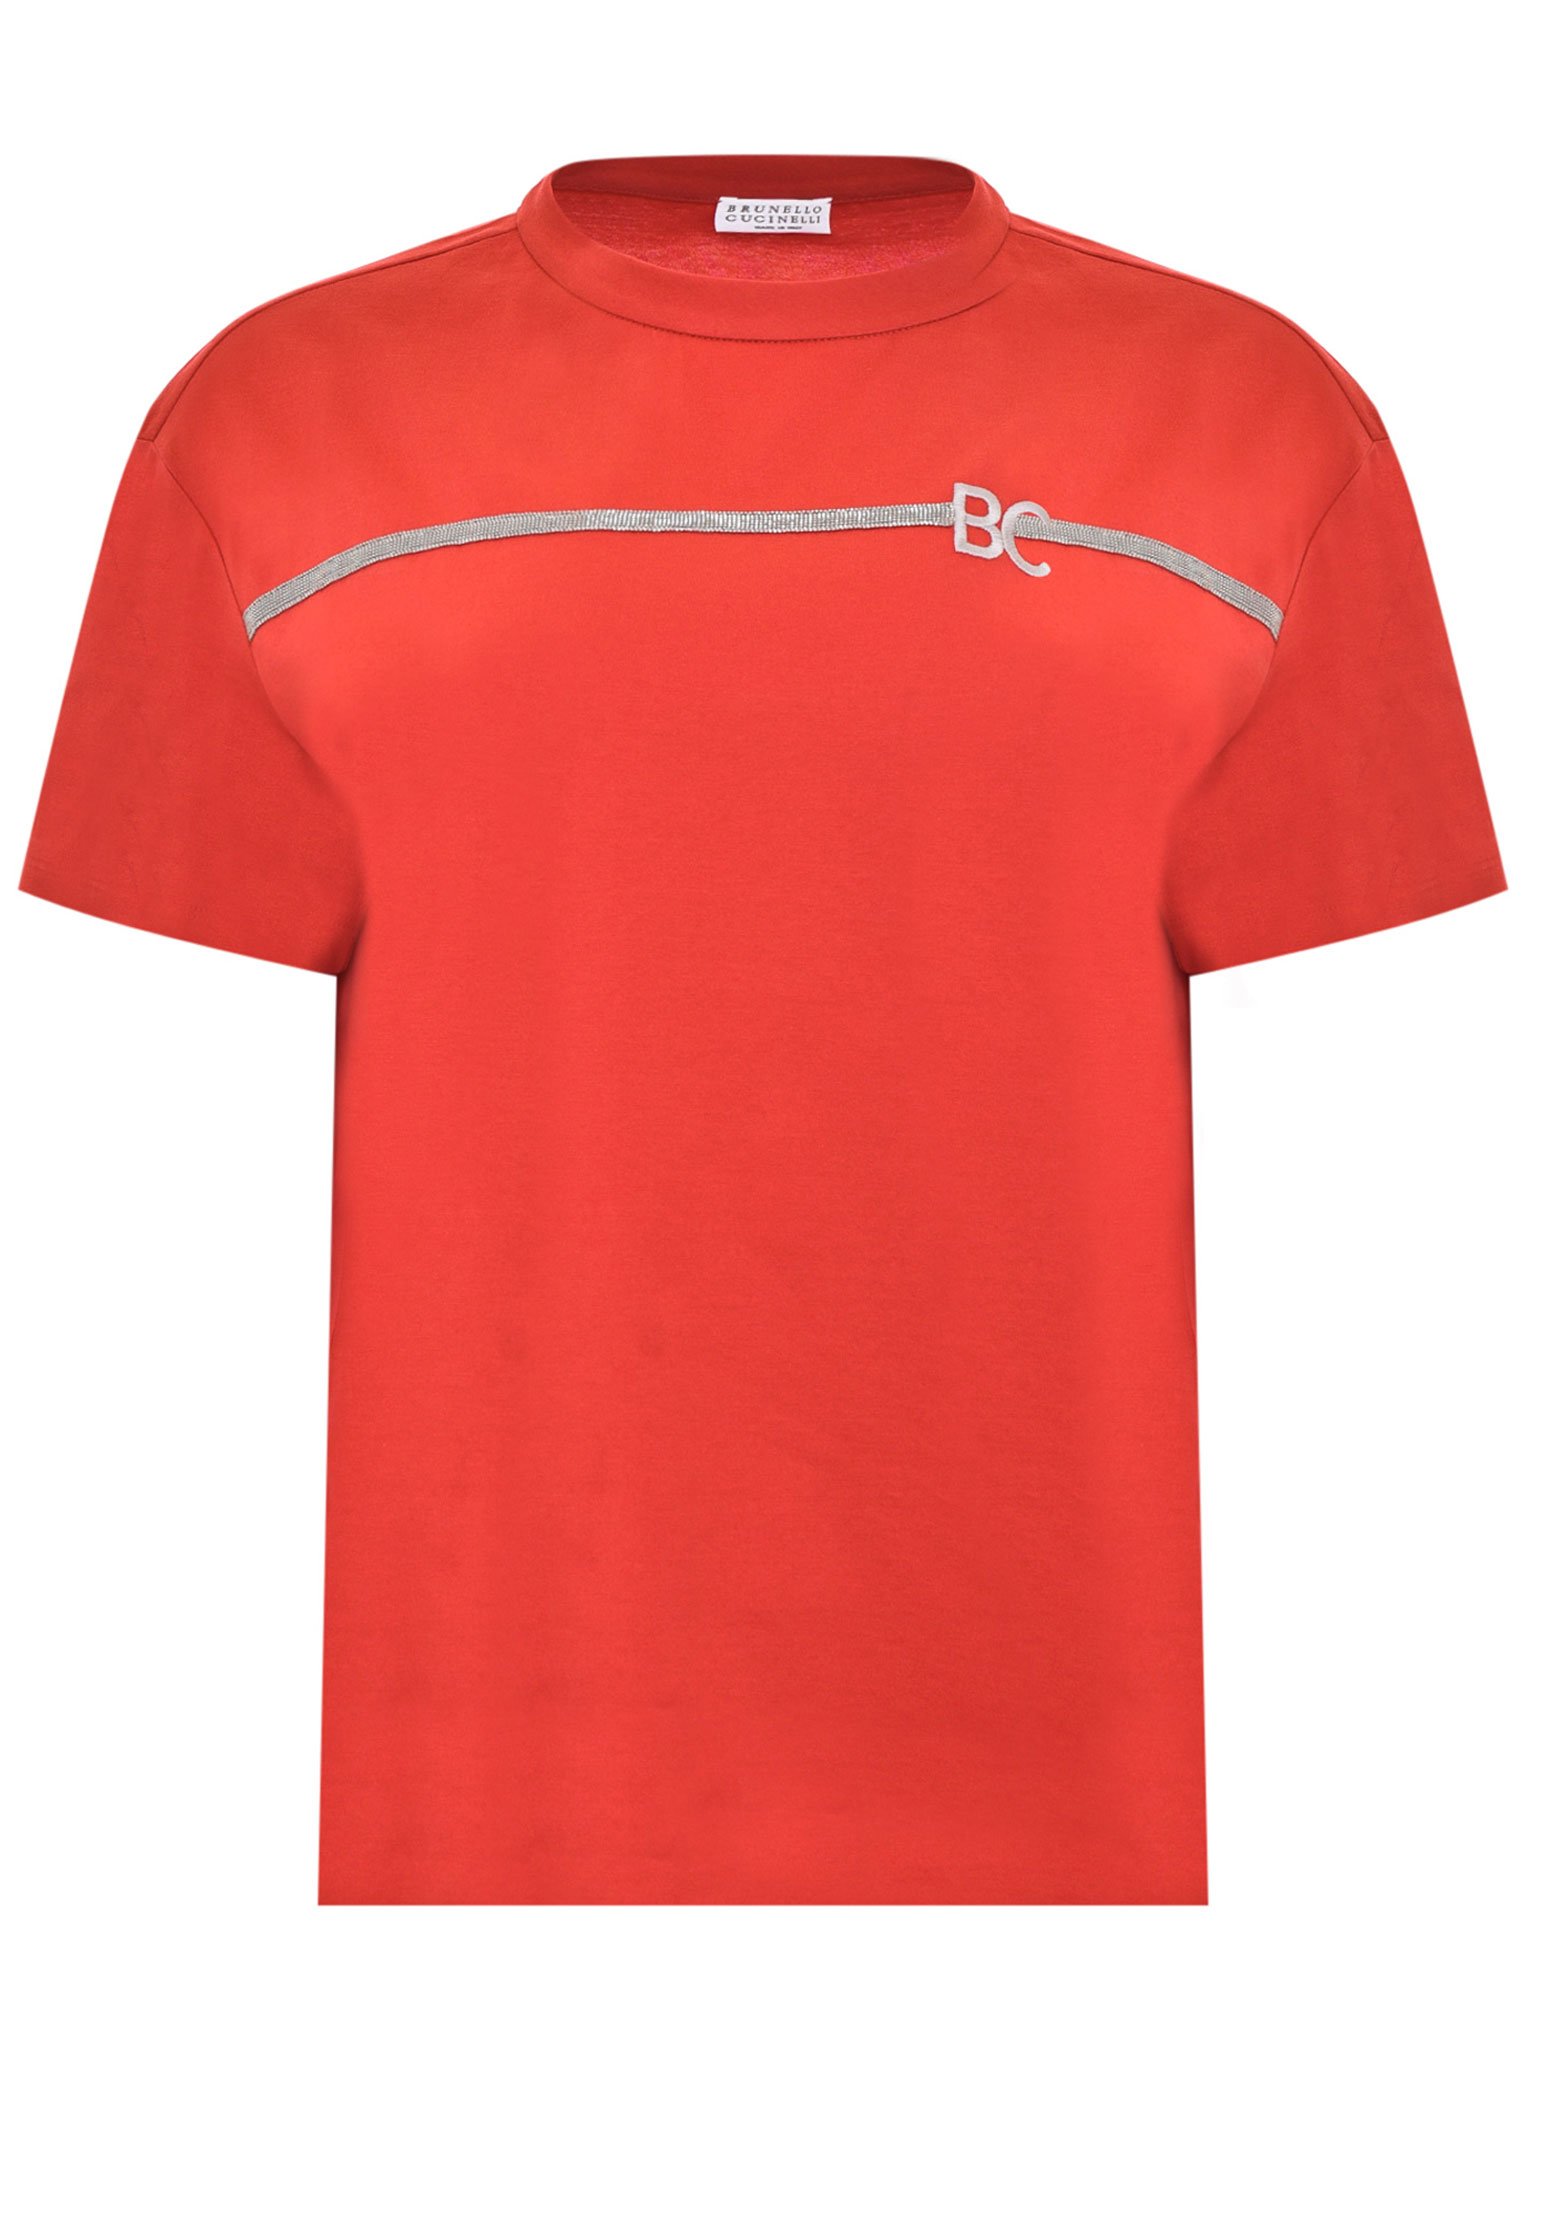 T-shirt BRUNELLO CUCINELLI Color: red (Code: 411) in online store Allure